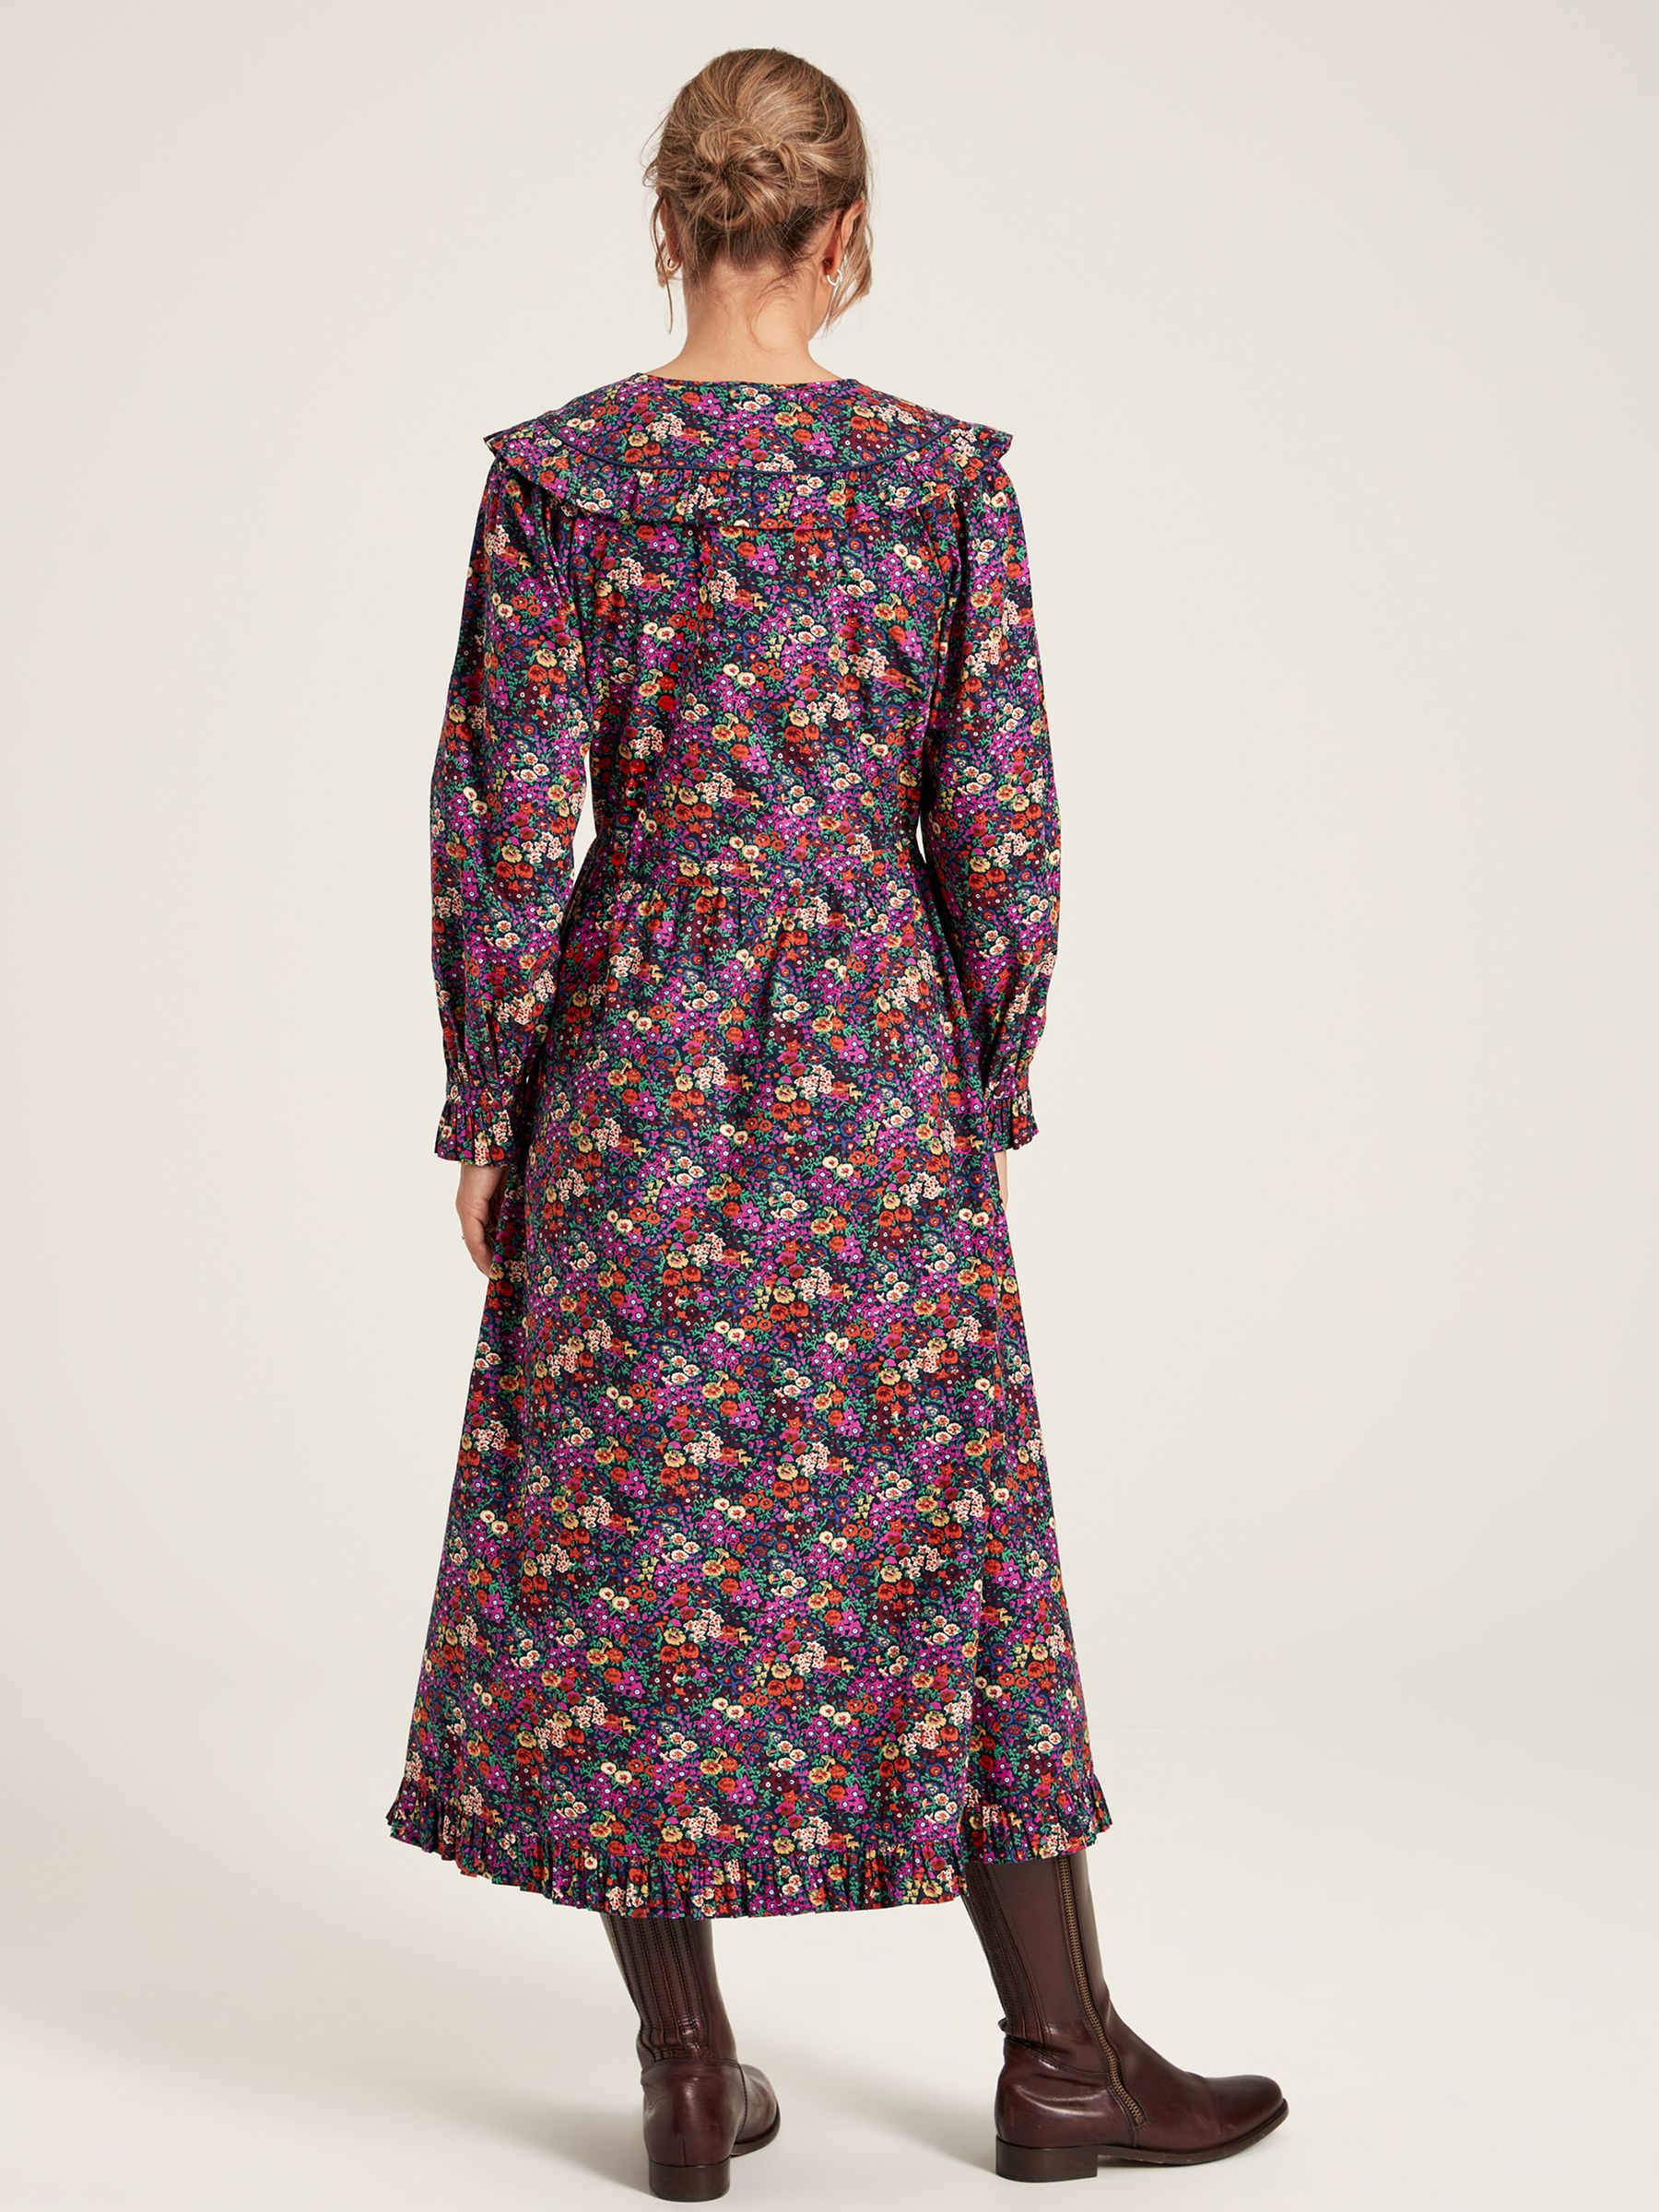 Buy Joules Heidi Frill Bib Dress from the Joules online shop